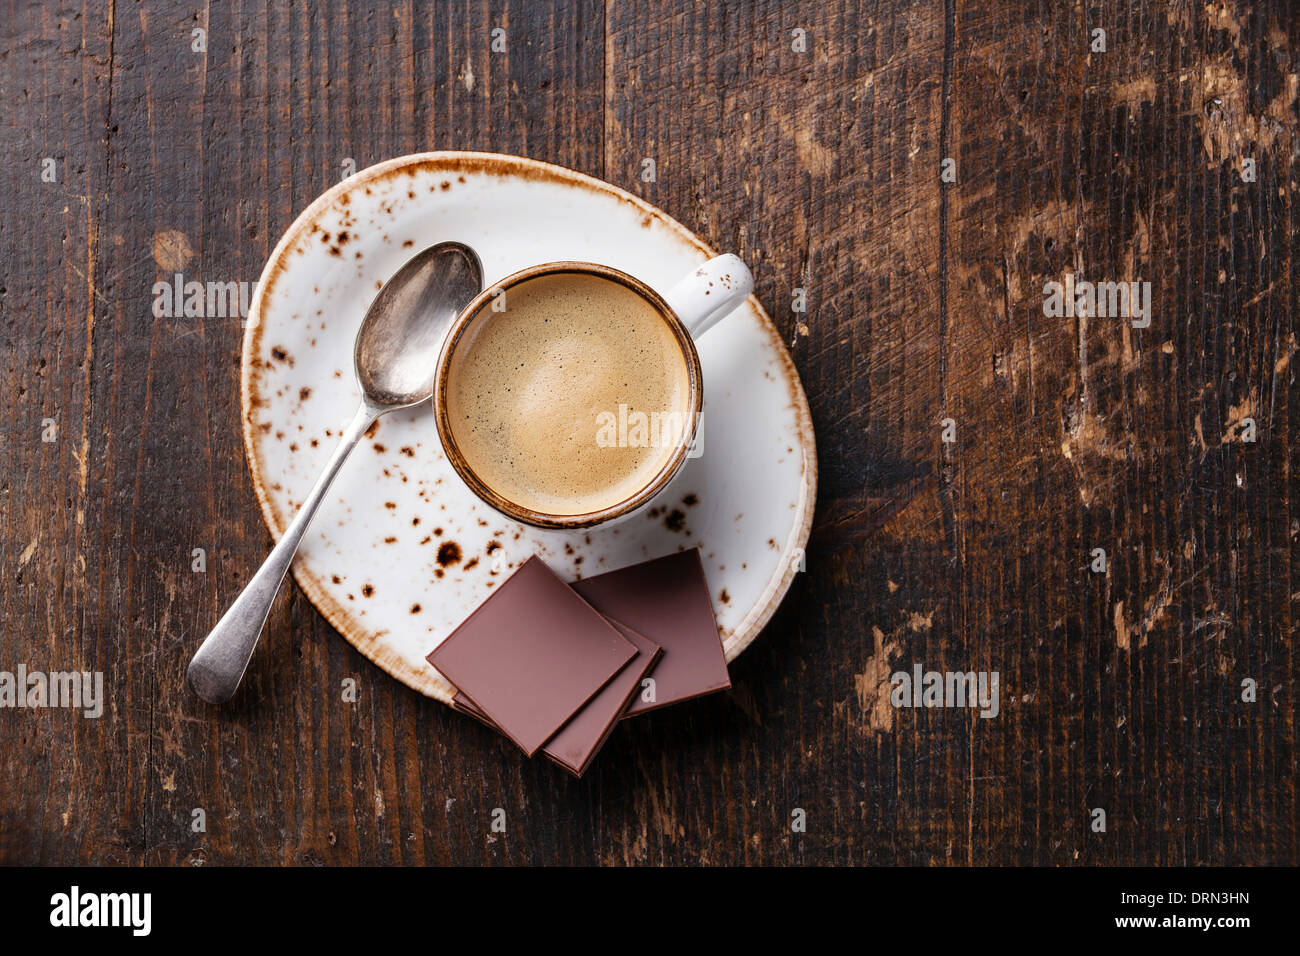 Espresso cup with chocolate on wooden background Stock Photo